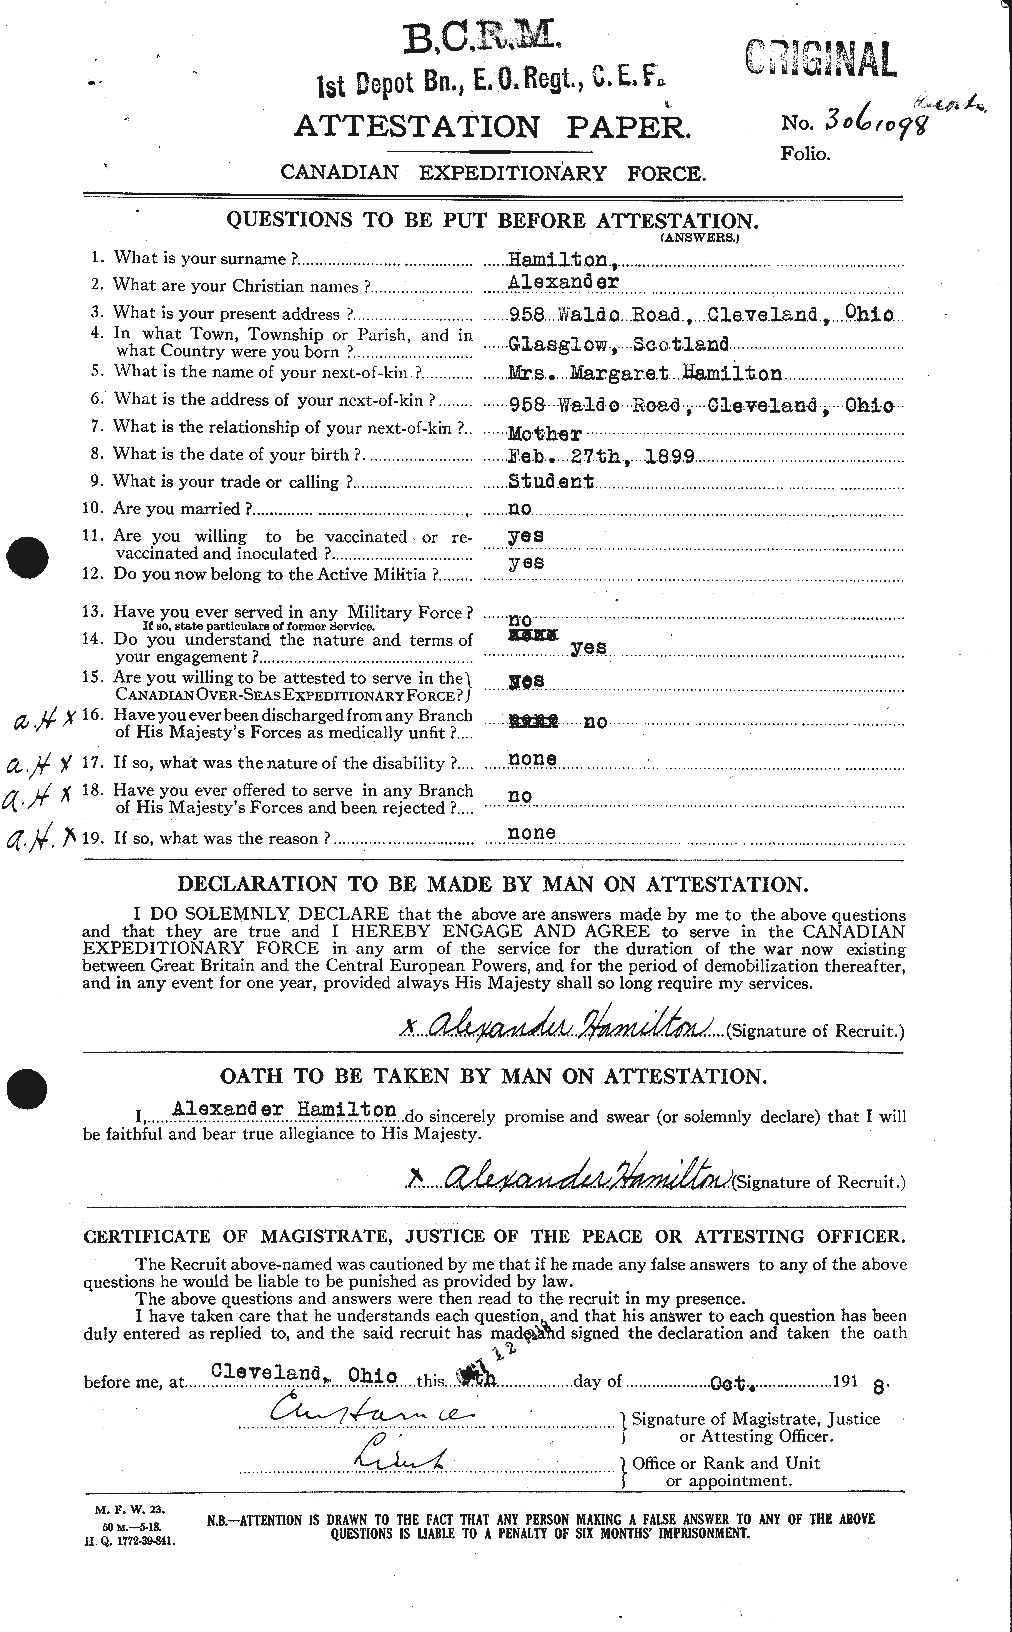 Personnel Records of the First World War - CEF 375198a